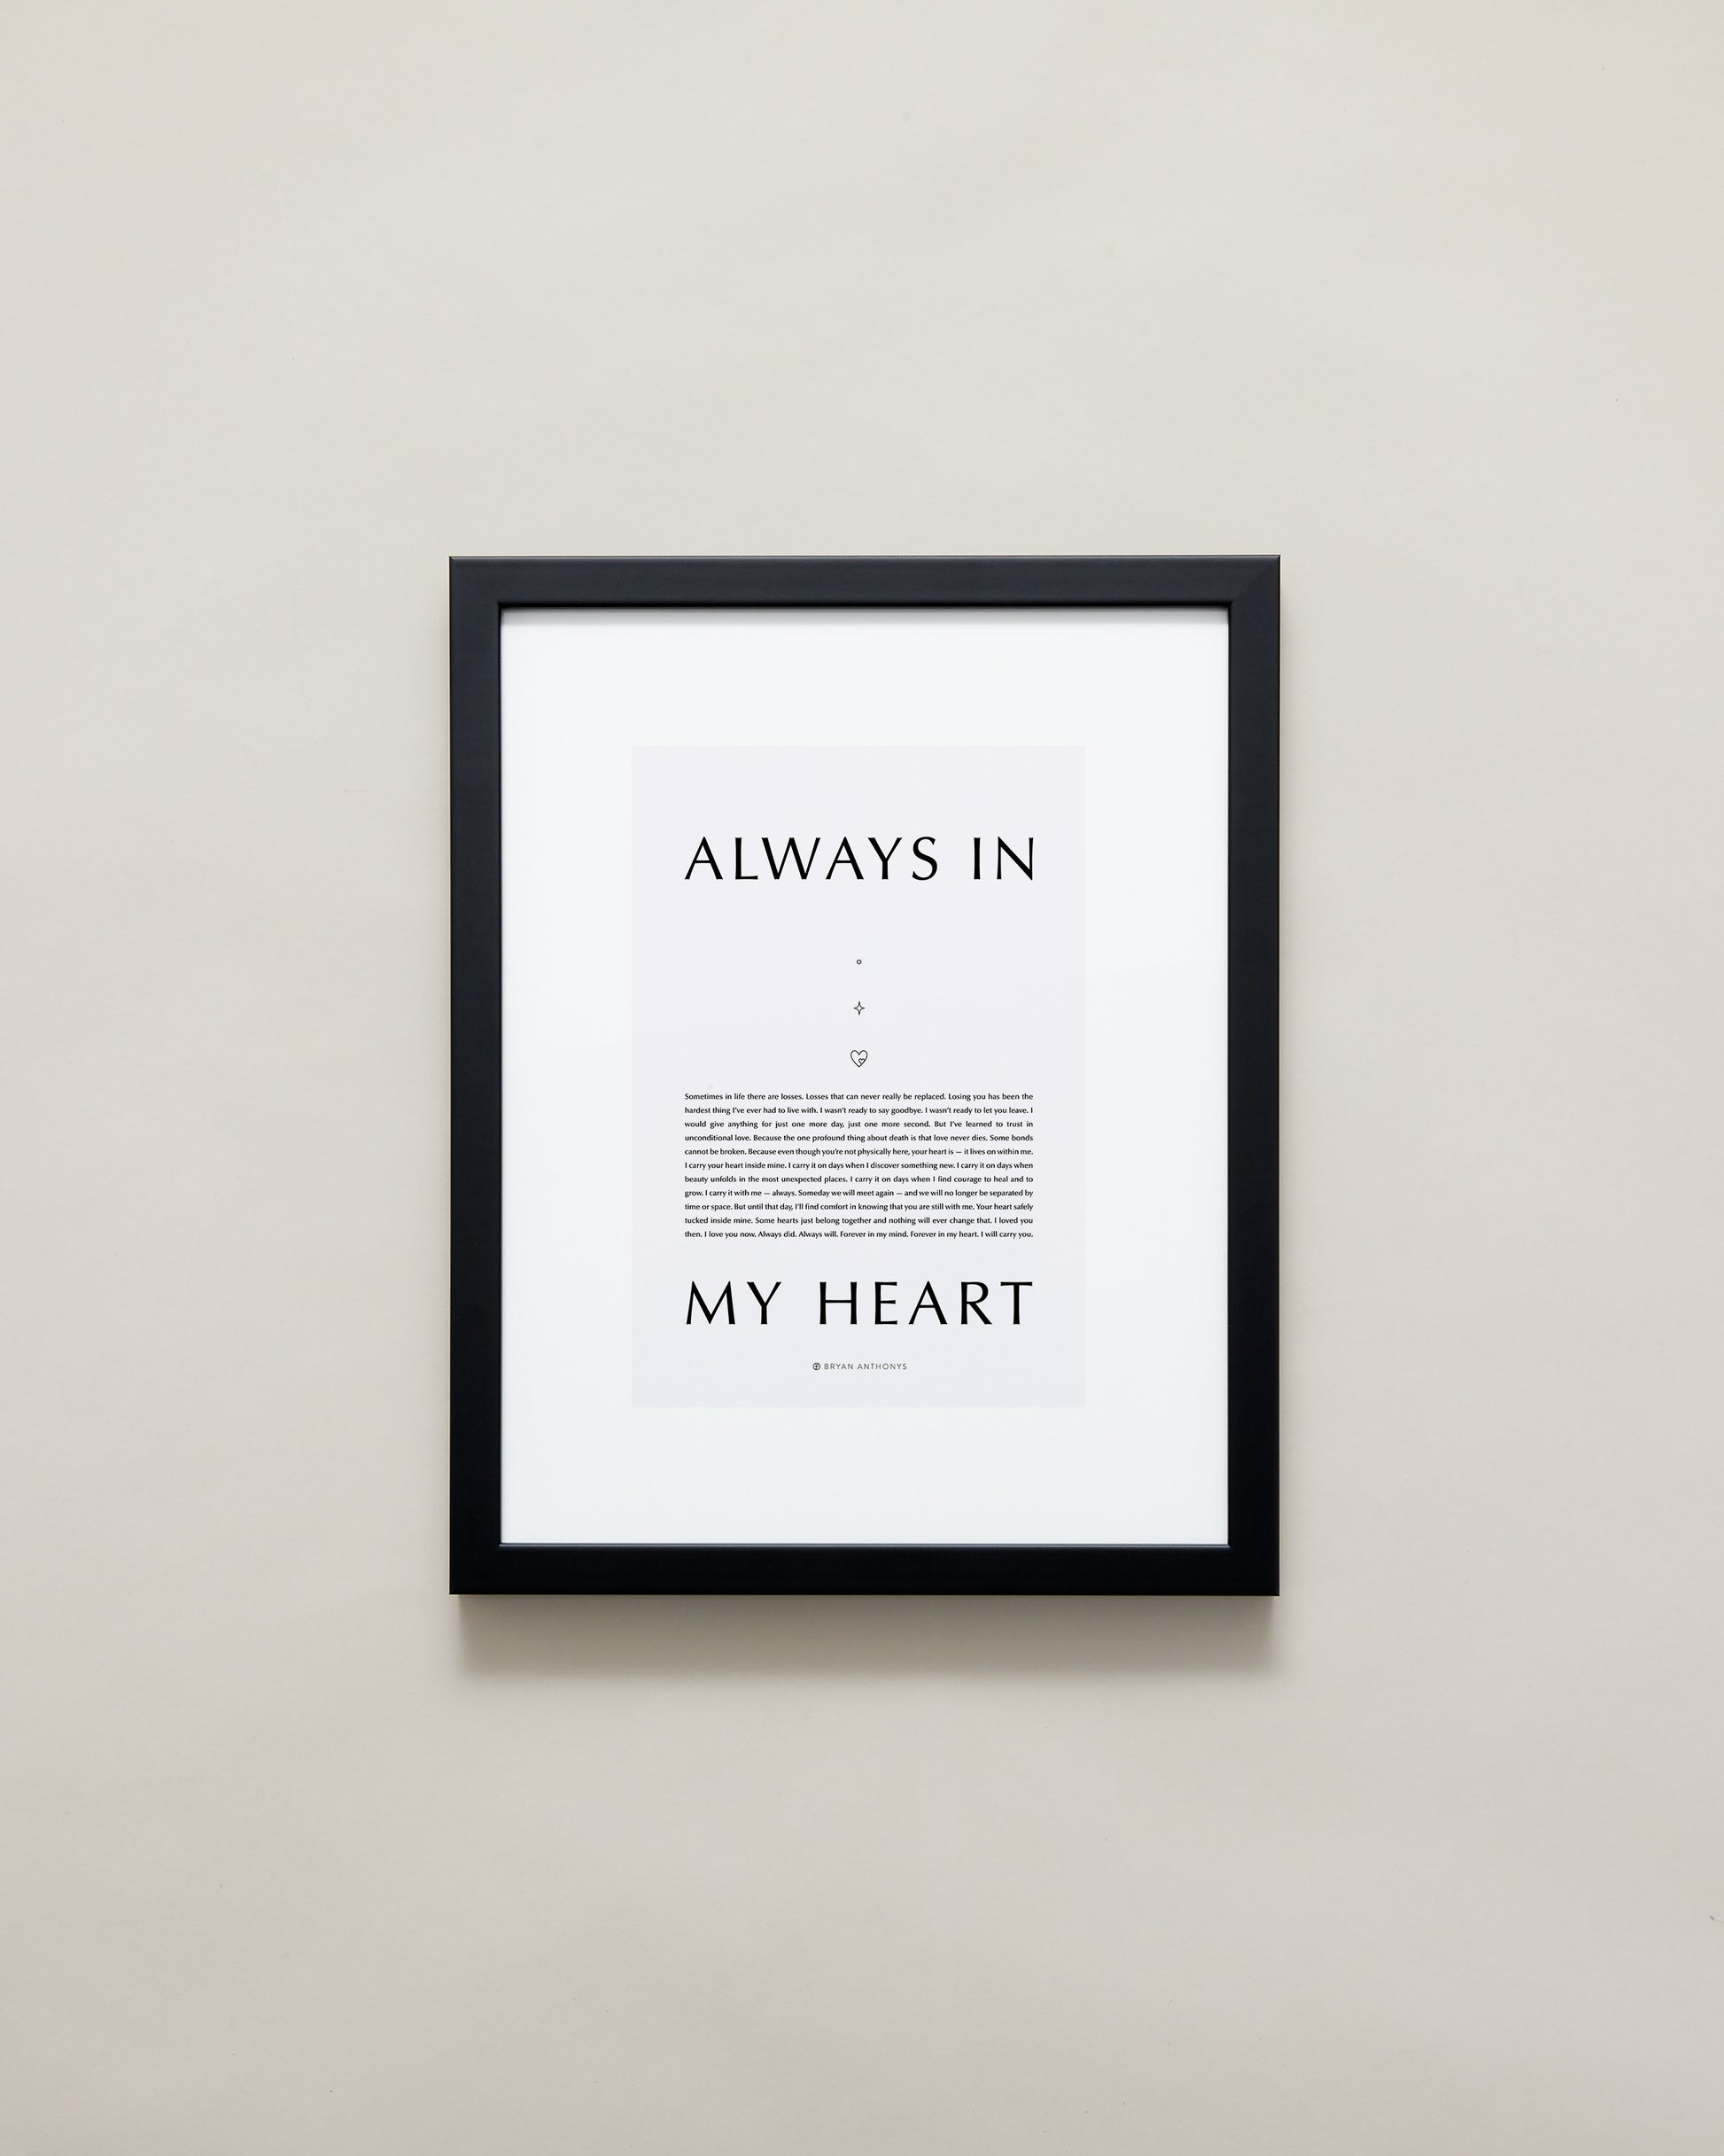 Bryan Anthonys Home Decor Purposeful Prints Always In My Heart Iconic Framed Print Gray Art With Black Frame 11x14